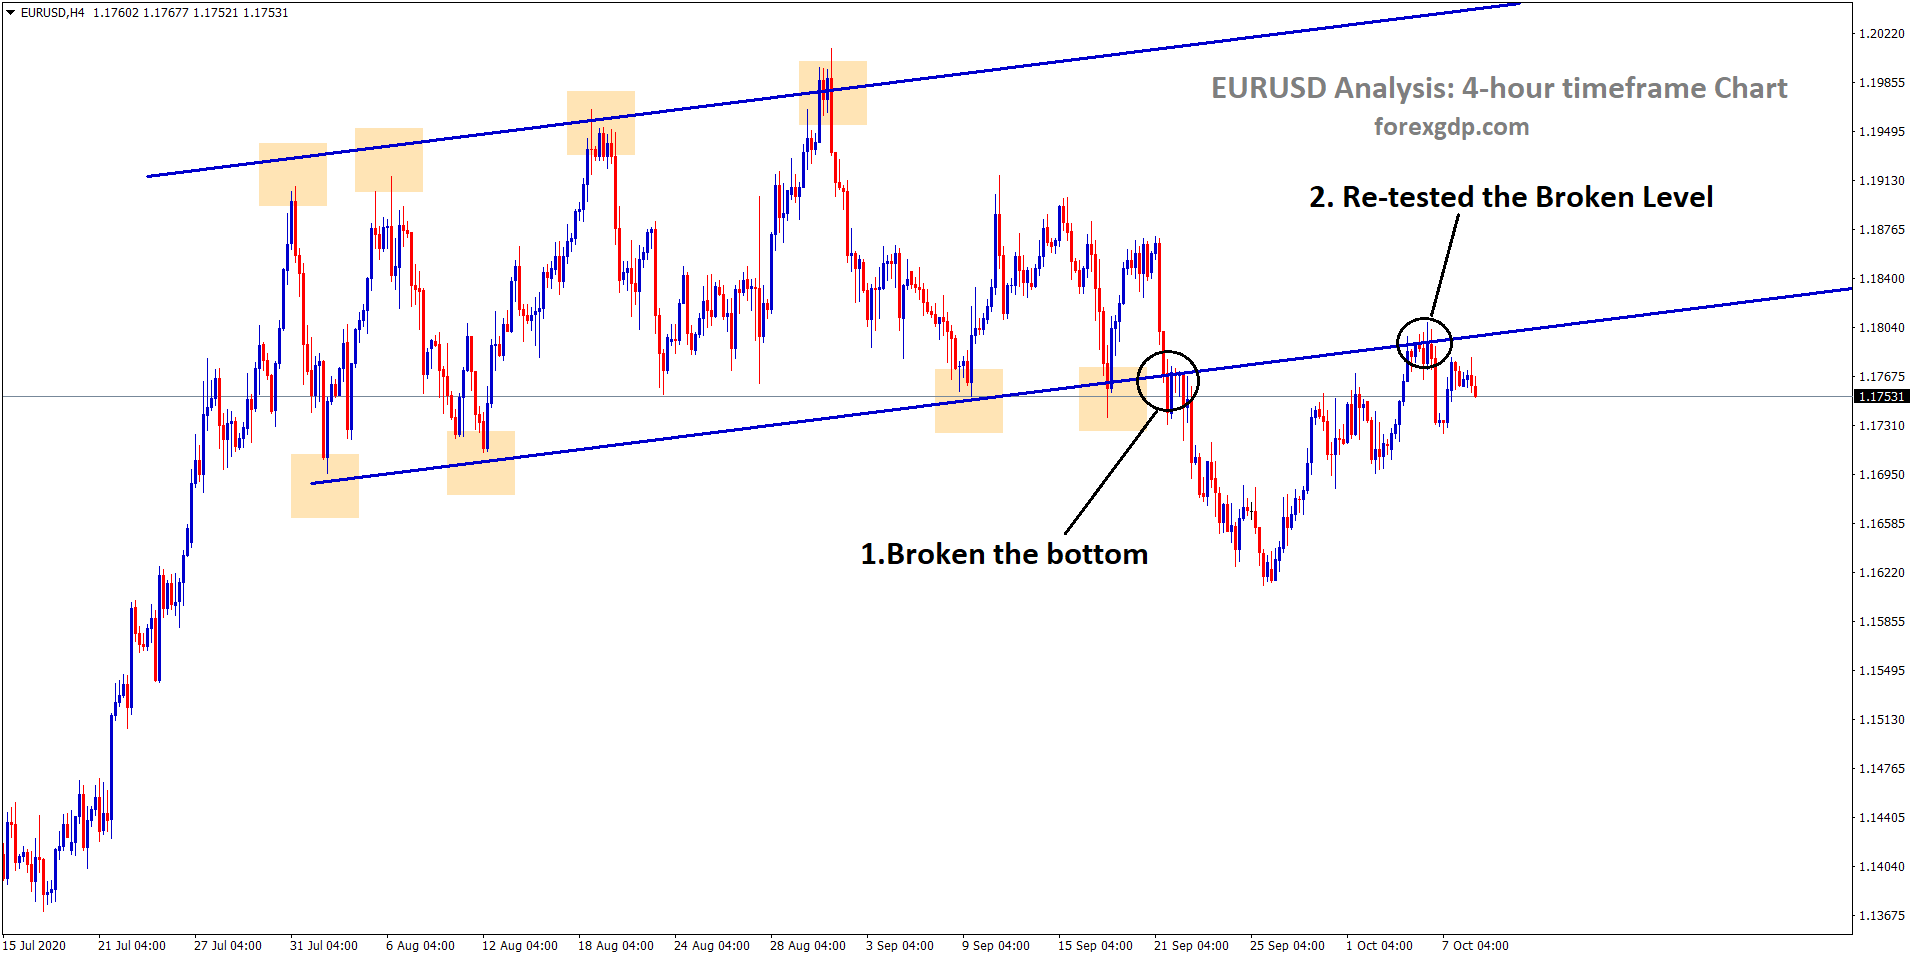 eurusd breakout and retested the broken level in h4